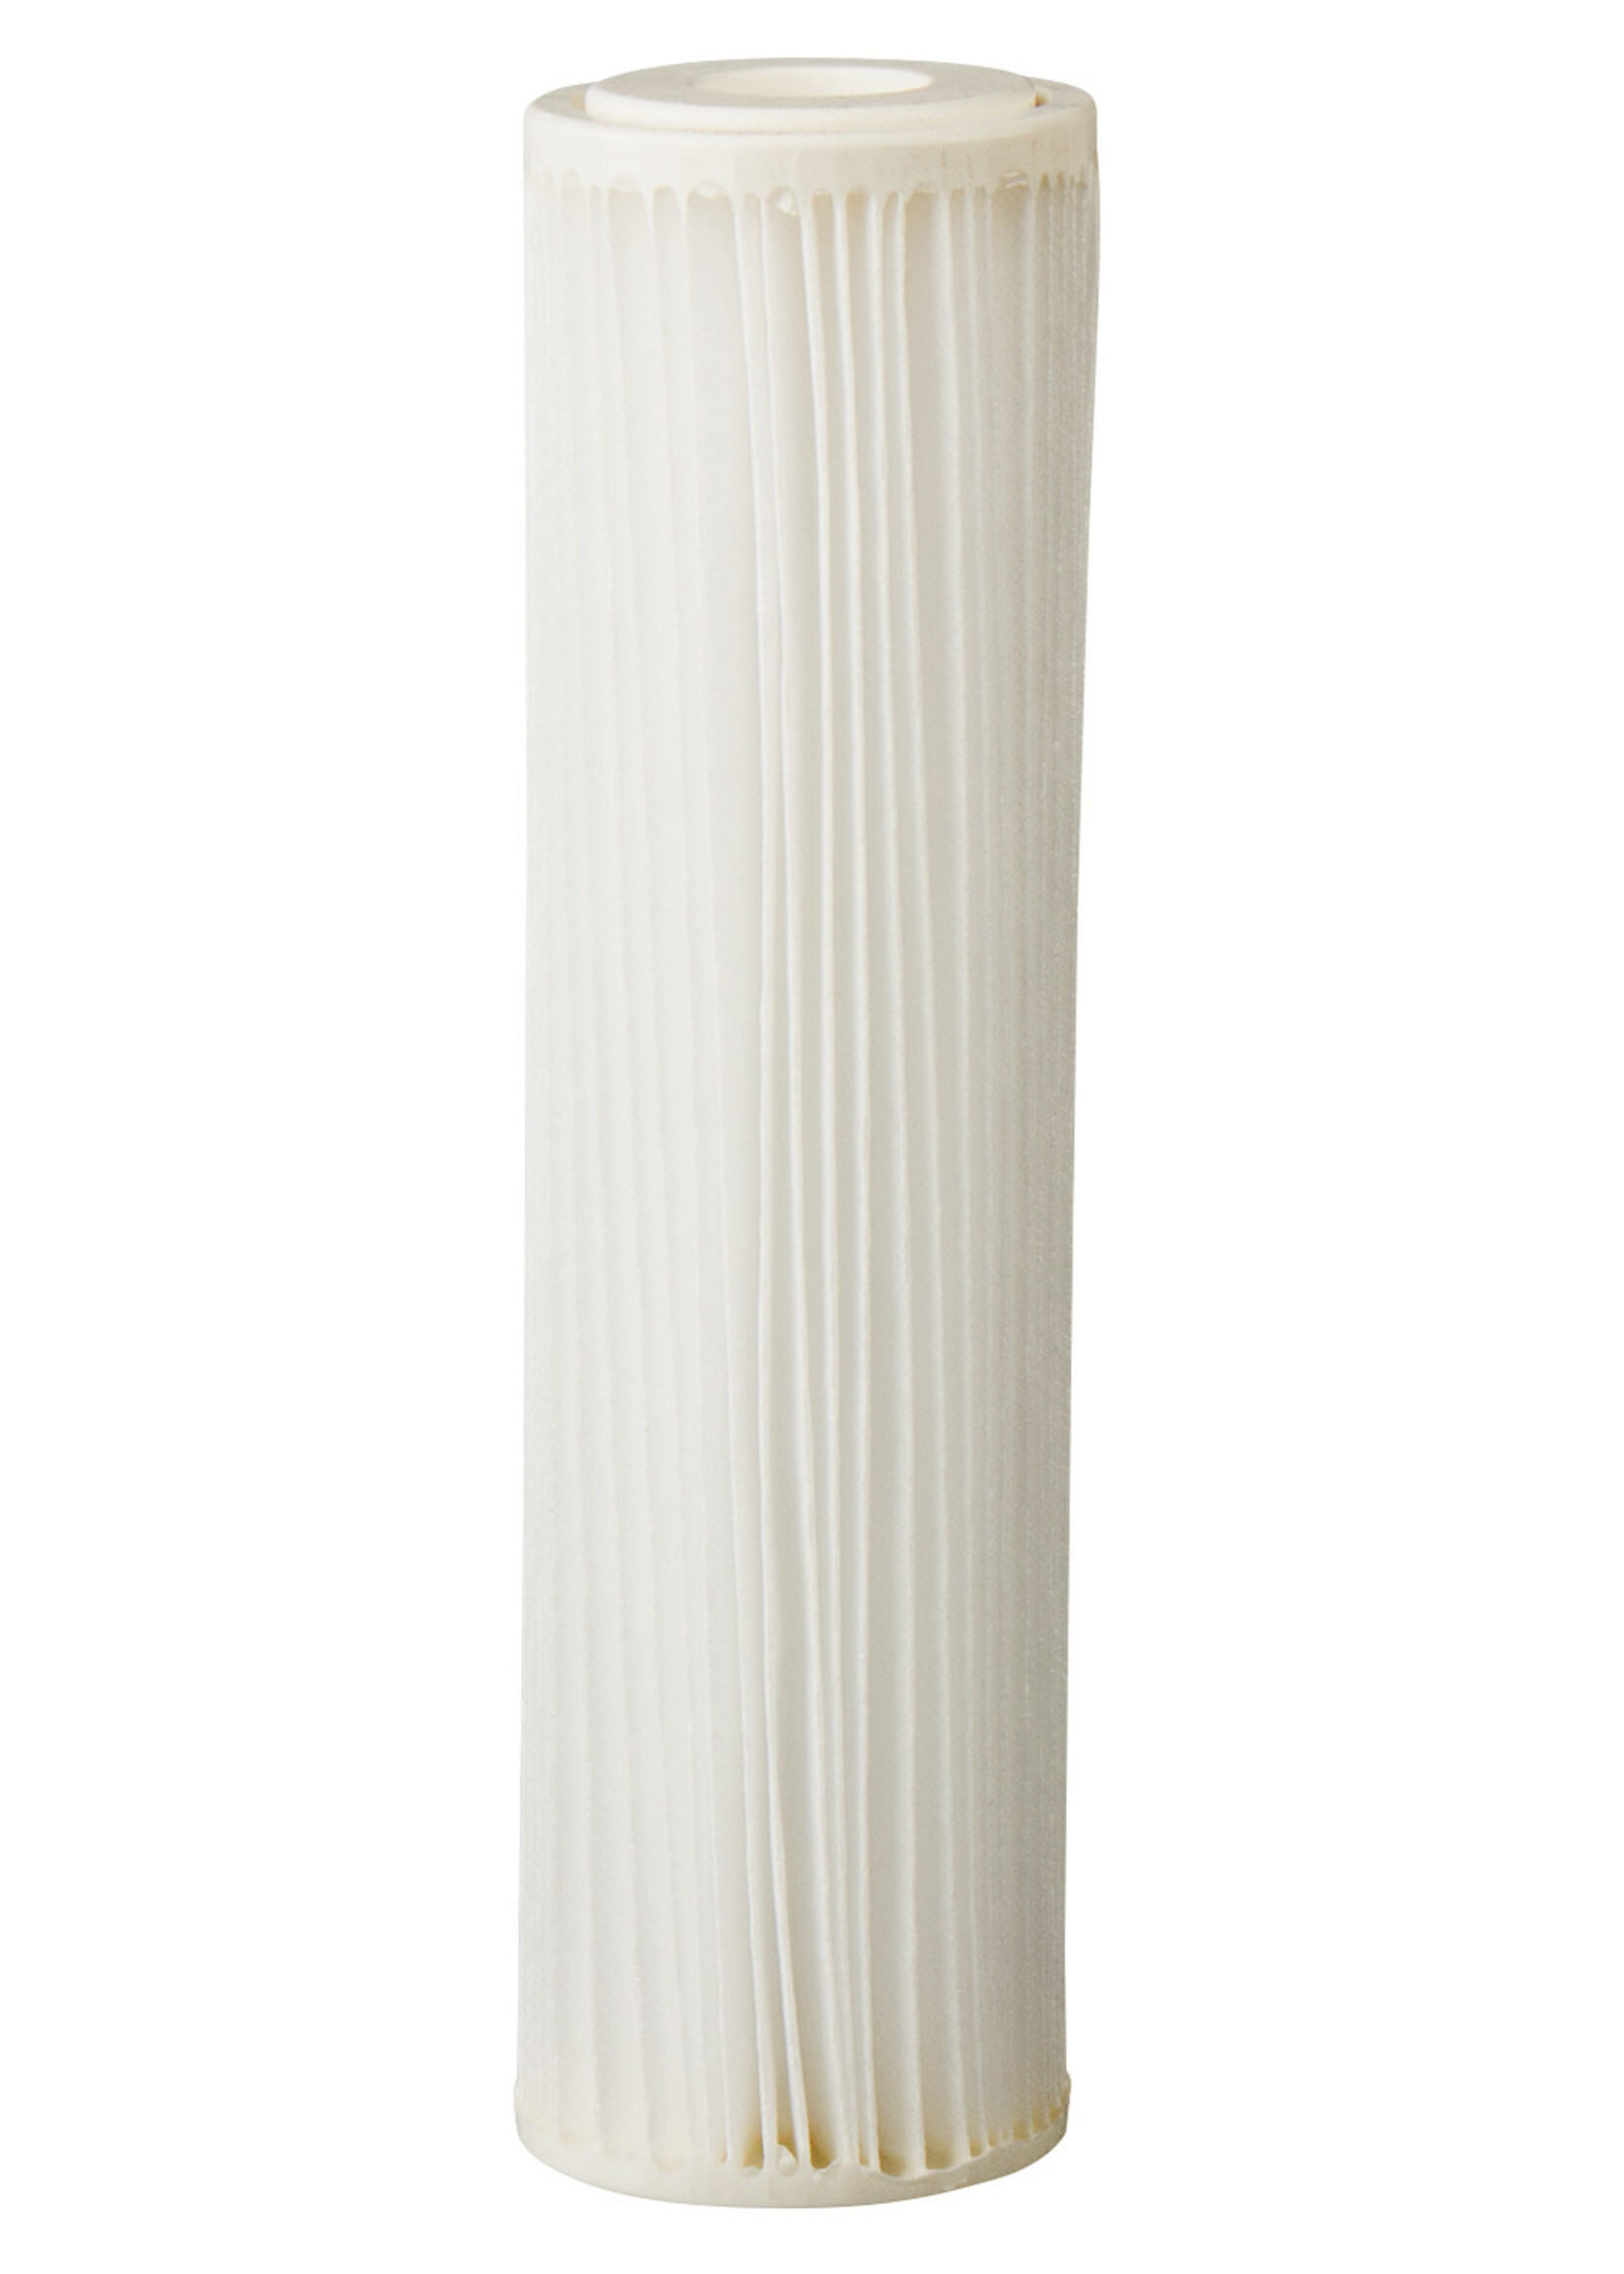 Hydrologic Hydro-Logic Stealth RO Sediment Filter - Pleated/Cleanable